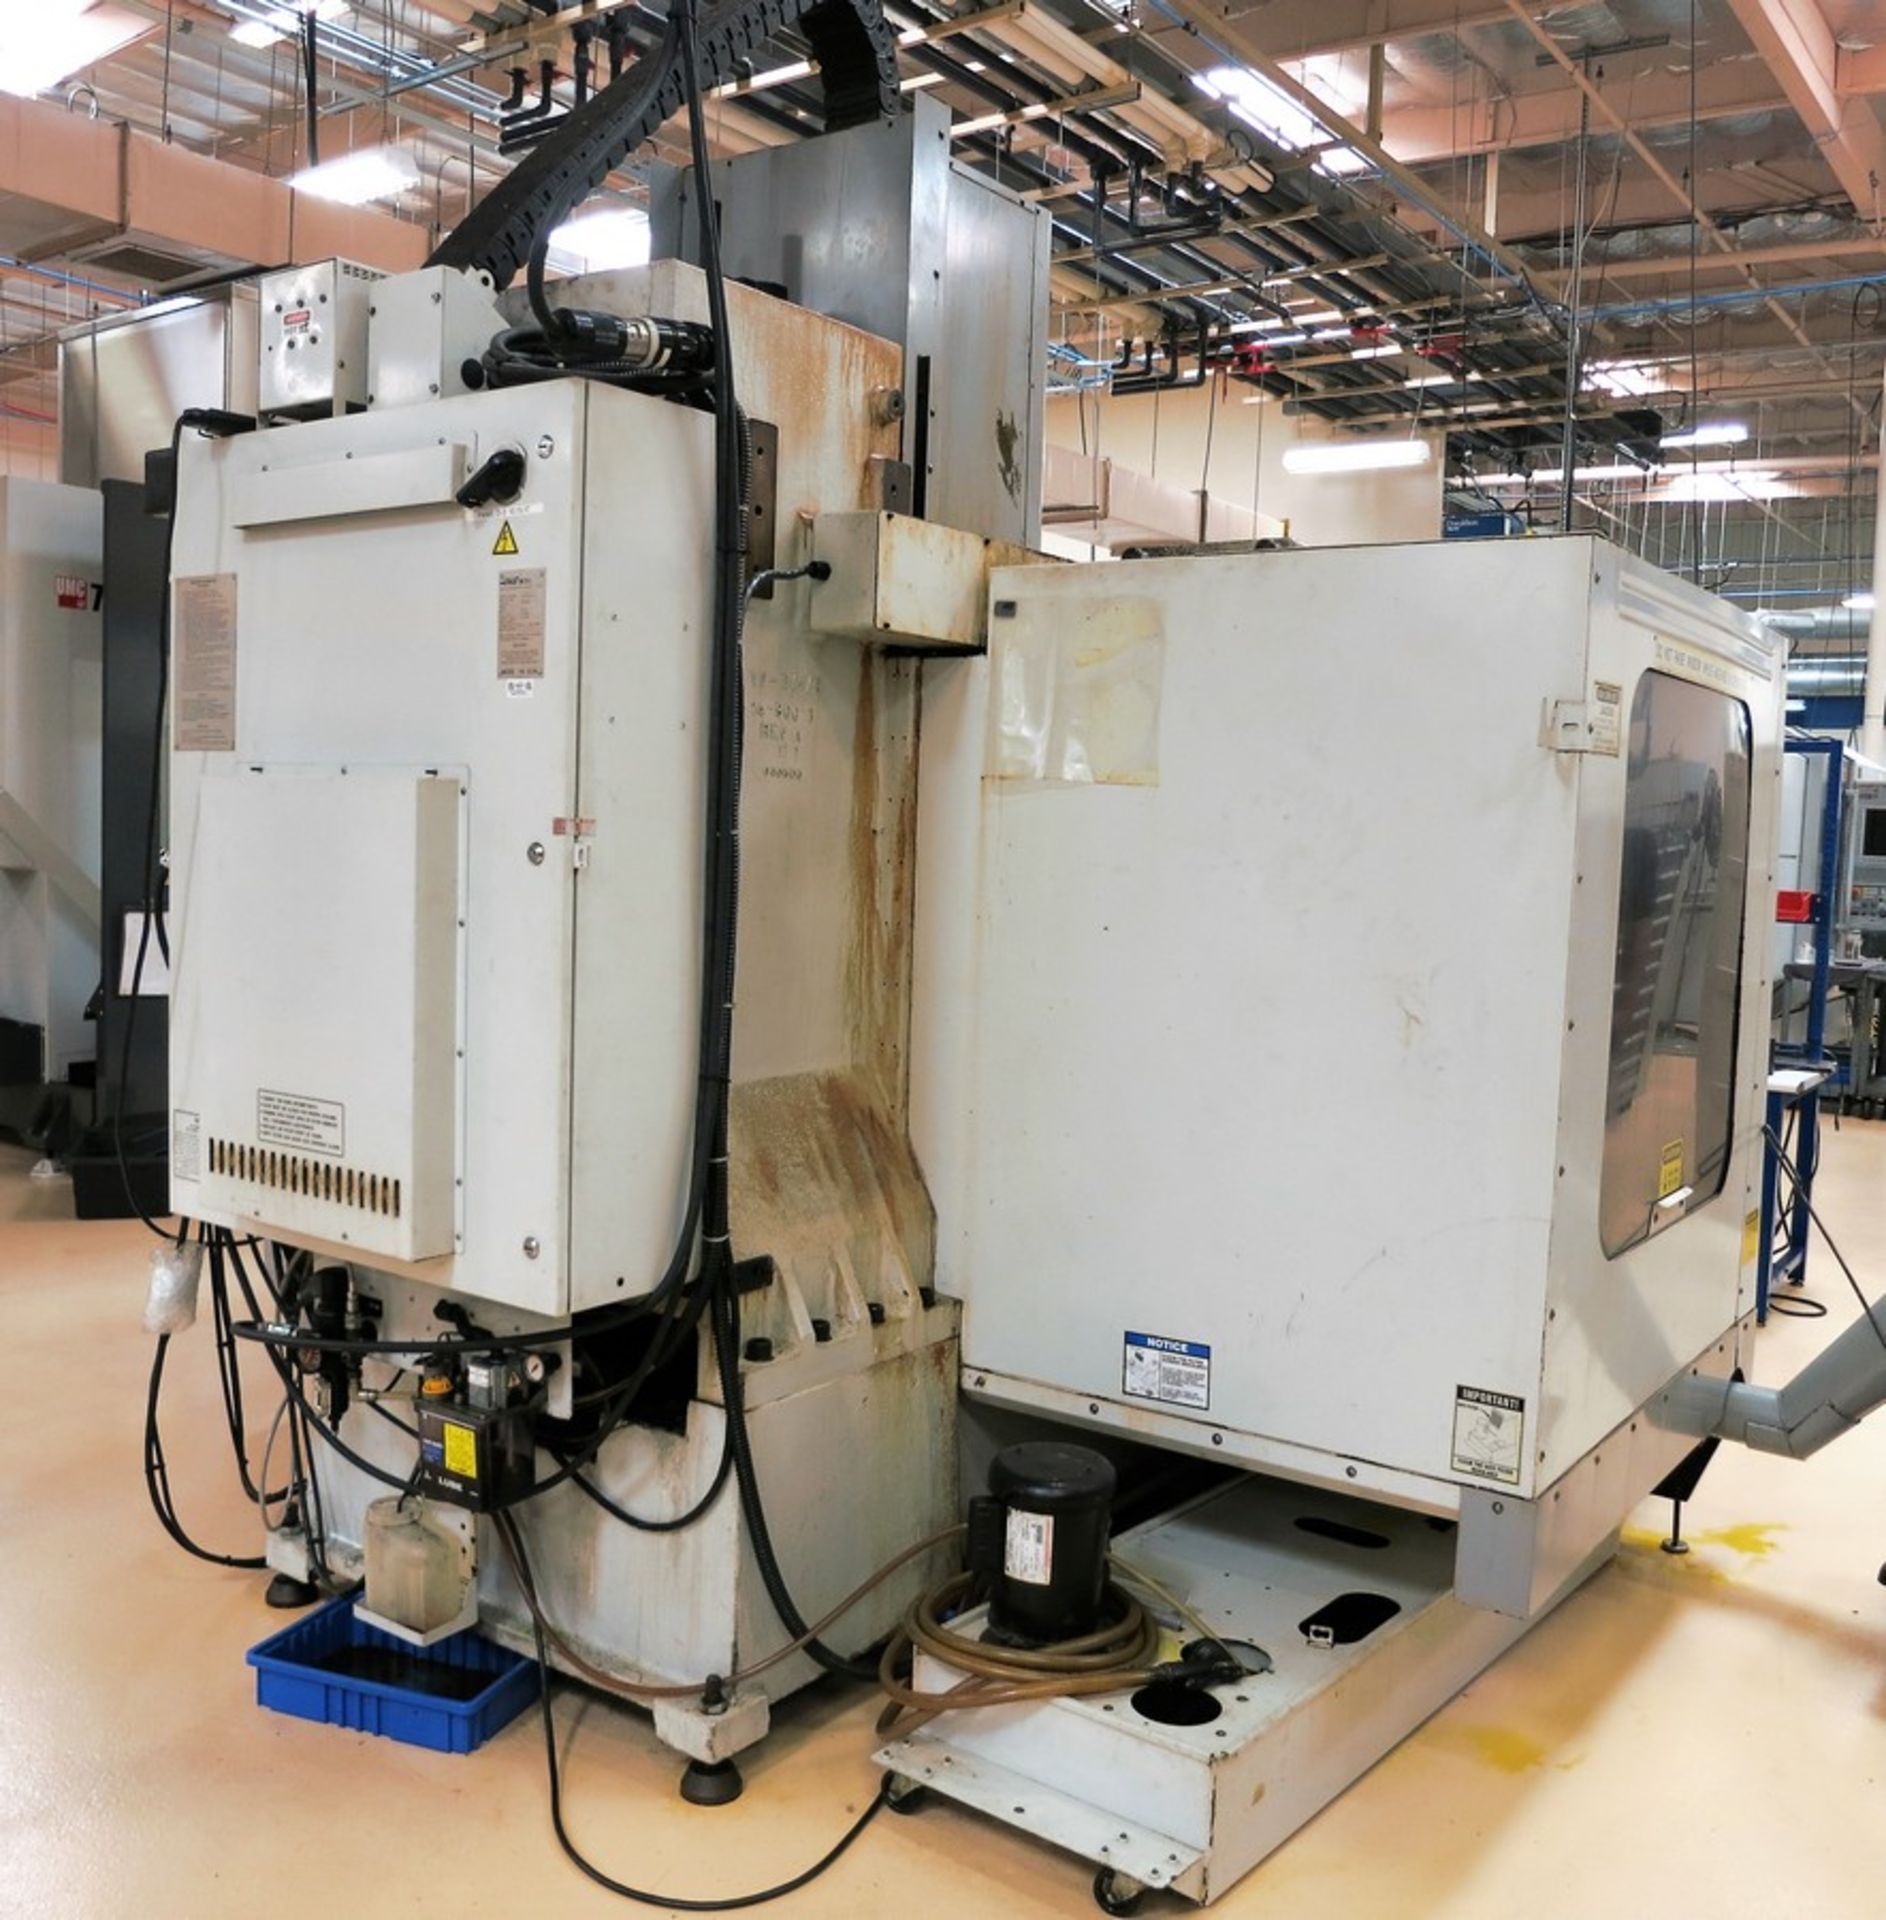 HAAS VF-3 5-AXIS CNC VERTICAL MACHINING CENTER, S/N 20914, NEW 2000 - Image 7 of 12